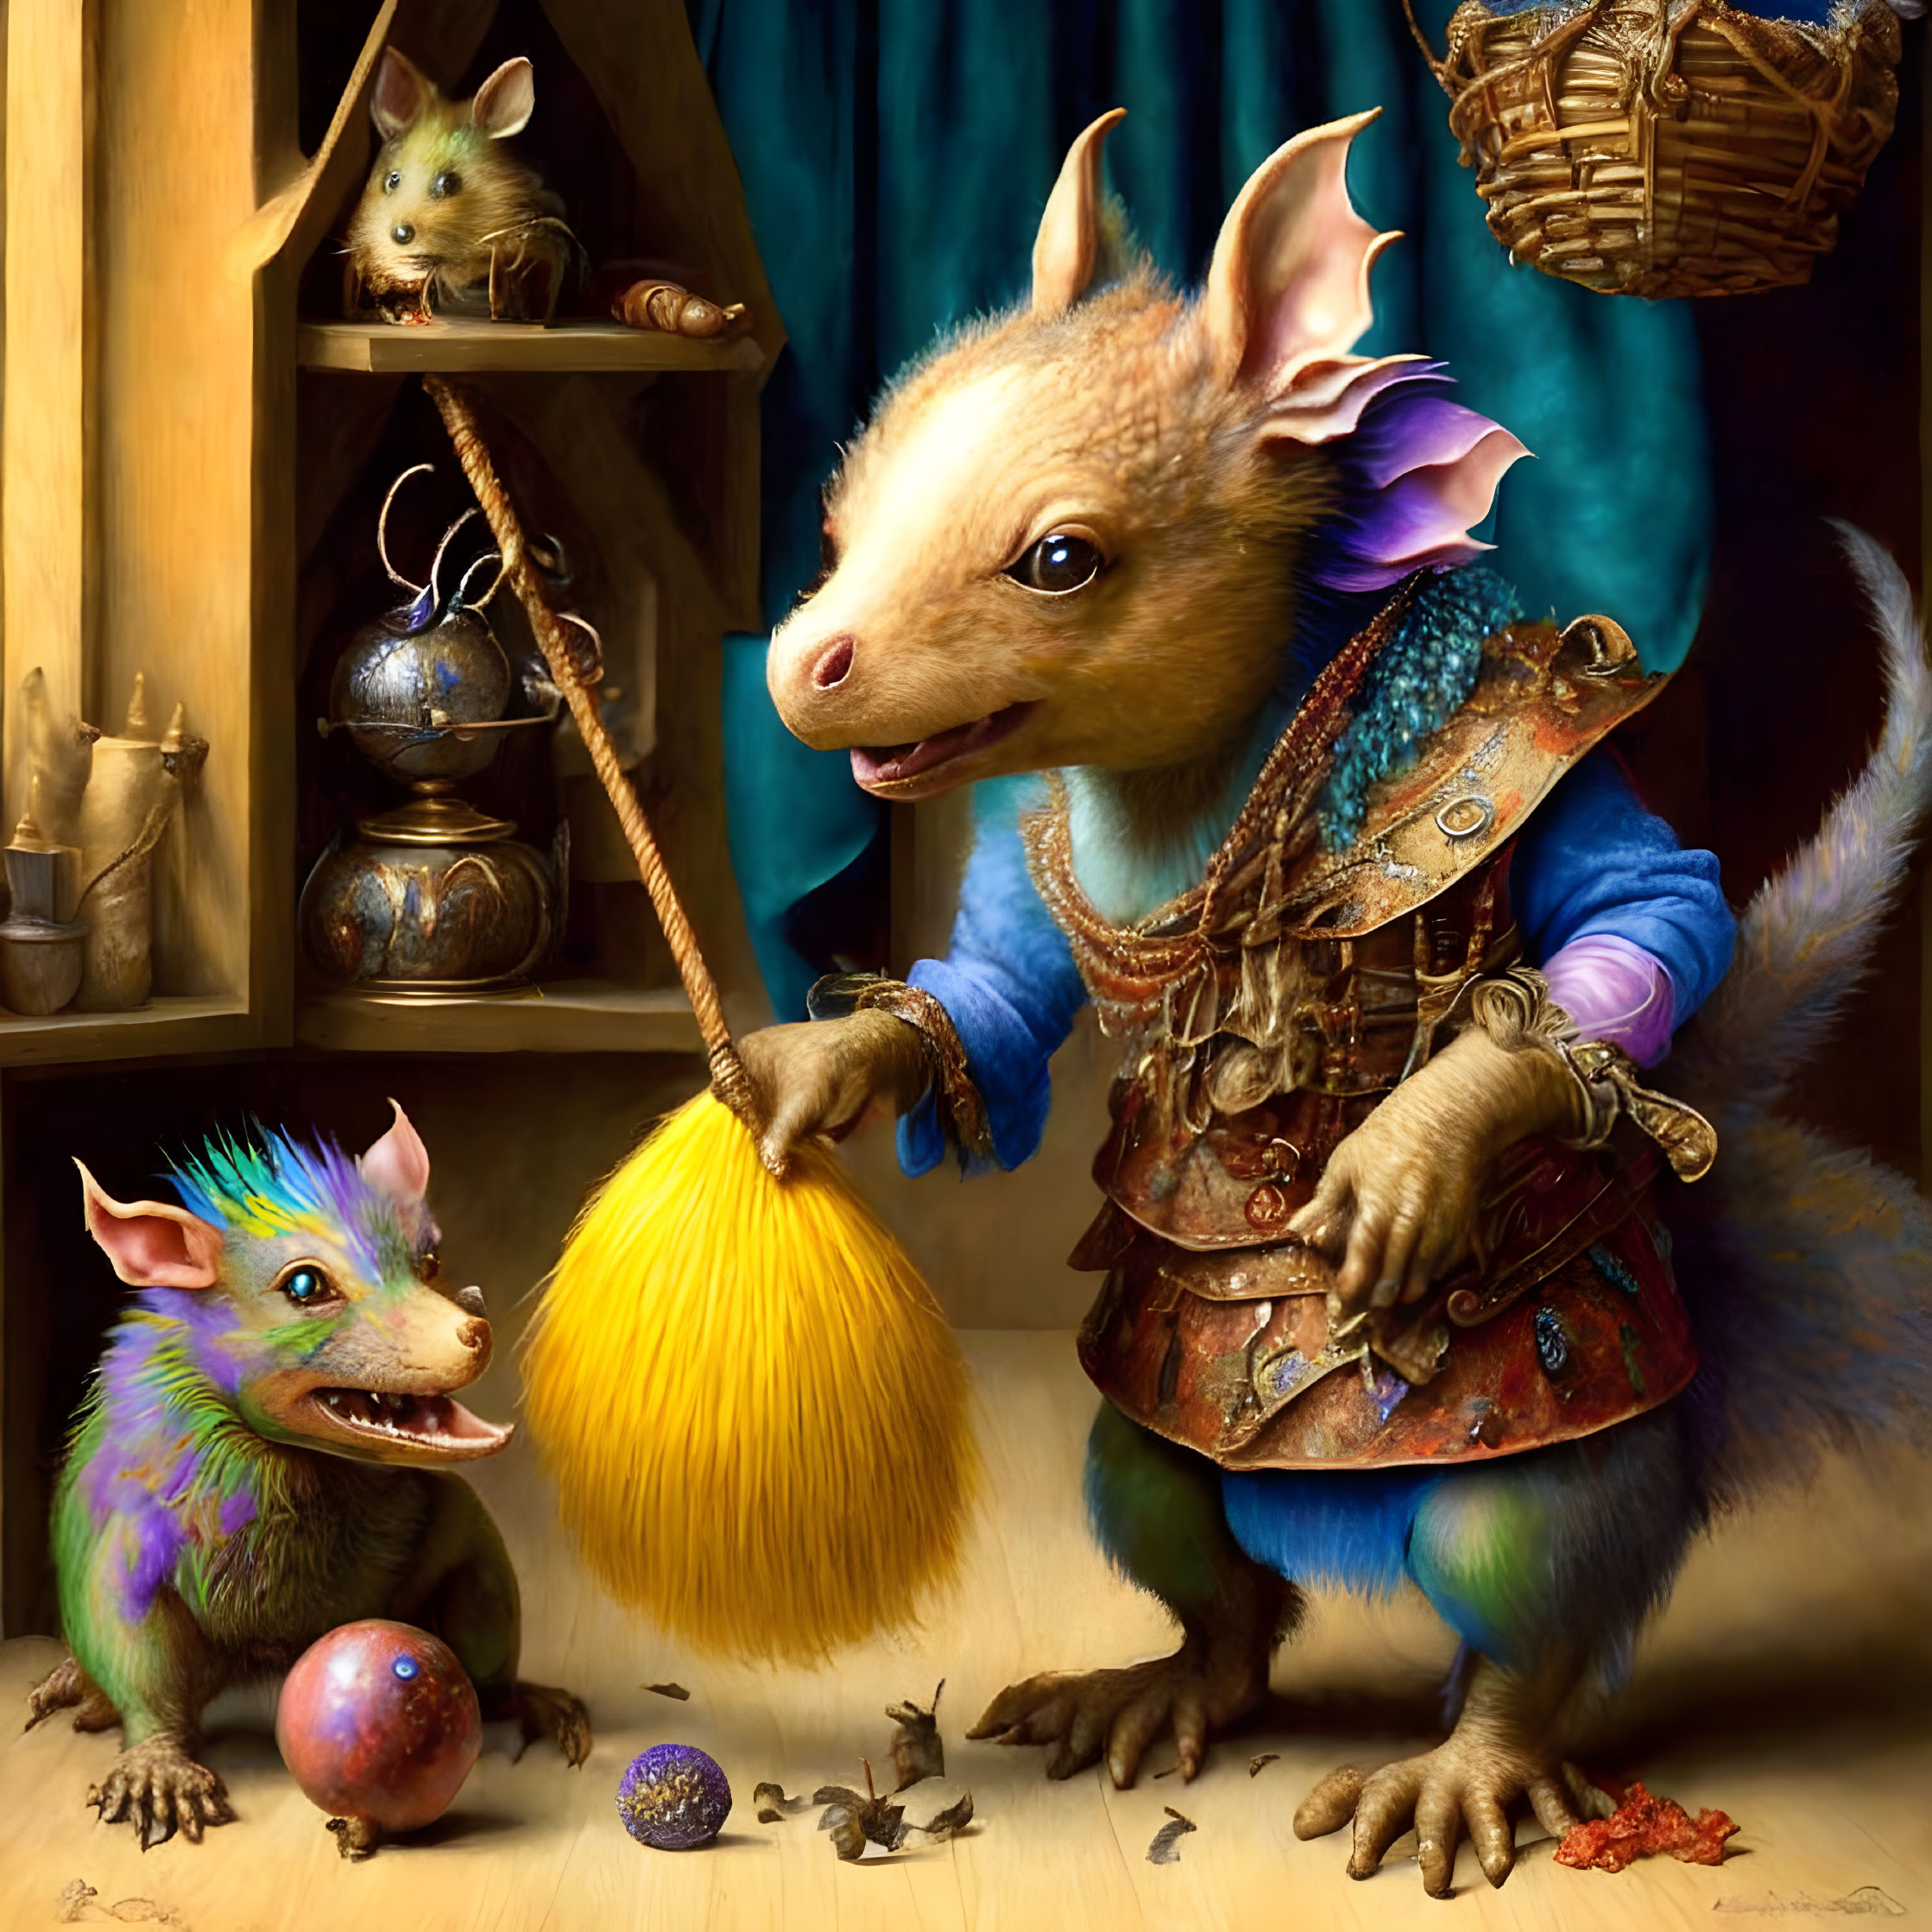 Medieval-themed anthropomorphic mouse with broom in rustic interior.